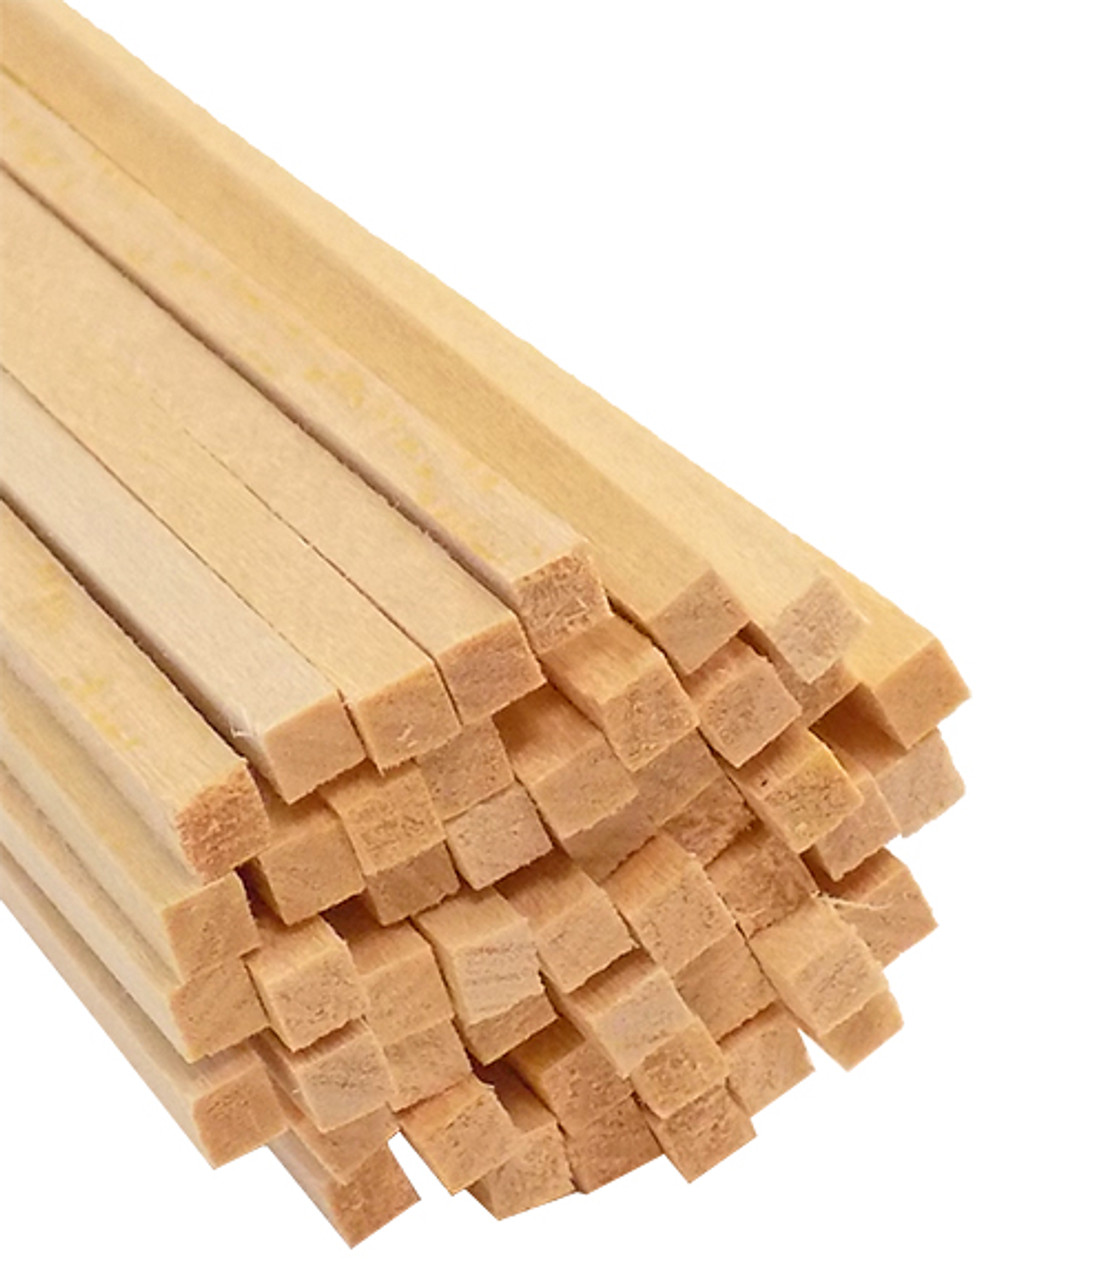 Bud Nosen Basswood Sheets - 1/4 inch x 1 inch x 24 inch, 10 Sheets